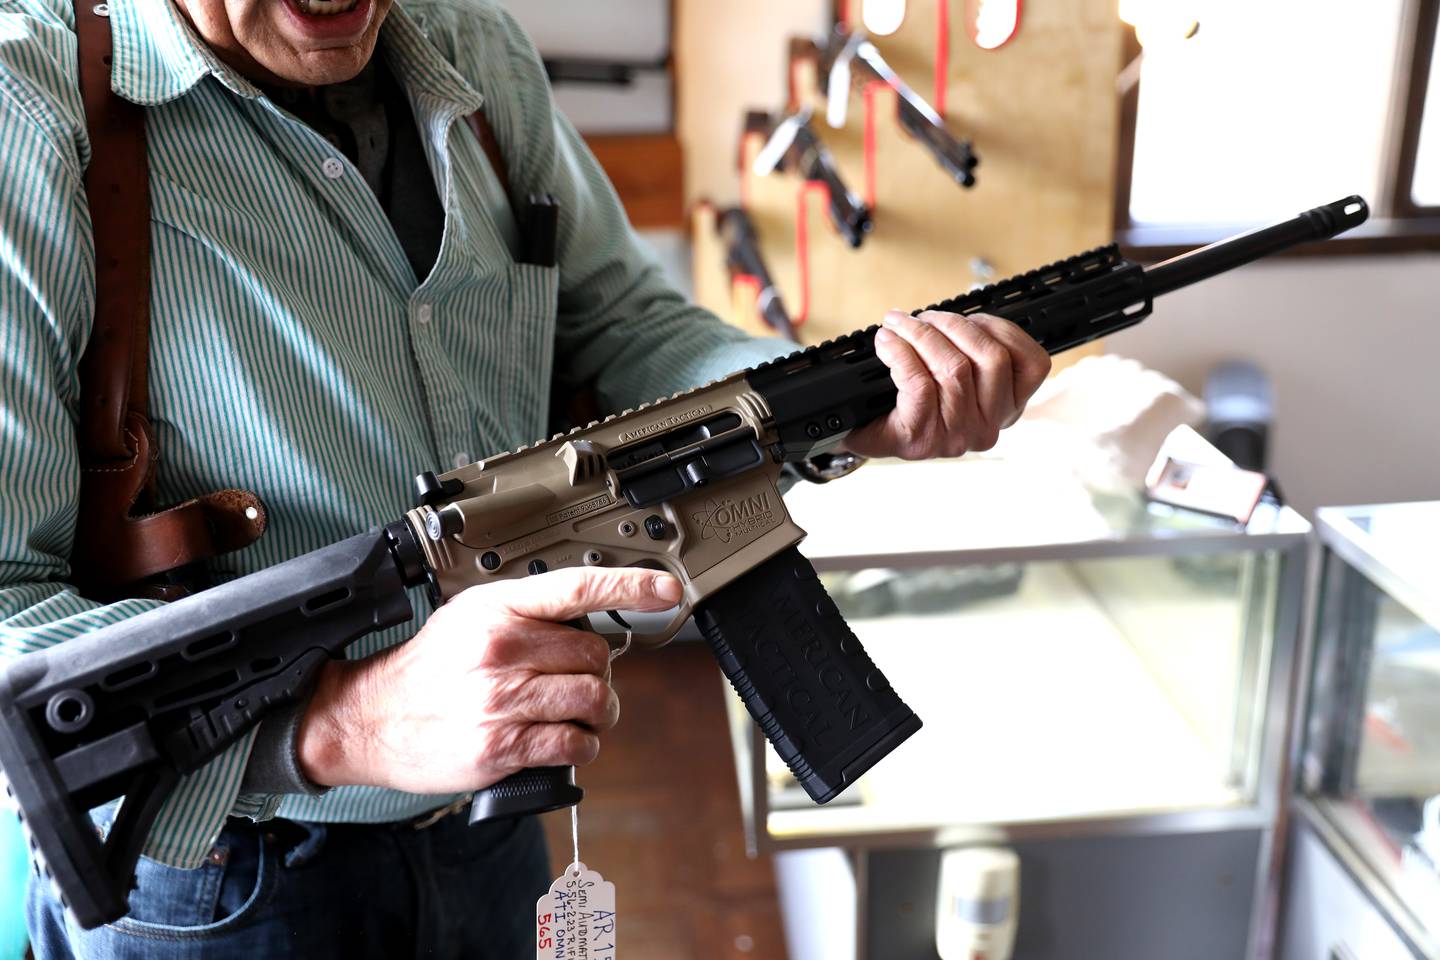 Manny Segarra of St. Charles holds the AR-15 rifle no longer for sale at his store, Manny Segarra Guns in West Chicago, on Wednesday, Jan. 11, 2023. Illinois Gov. JB Pritzker signed a bill Tuesday, Jan. 10, 2023 banning the purchase, sale and manufacture of high powered semi-automatic weapons, .50 caliber rifles and ammunition, and large-capacity magazines in the state while still allowing people who already own such weapons to keep them.